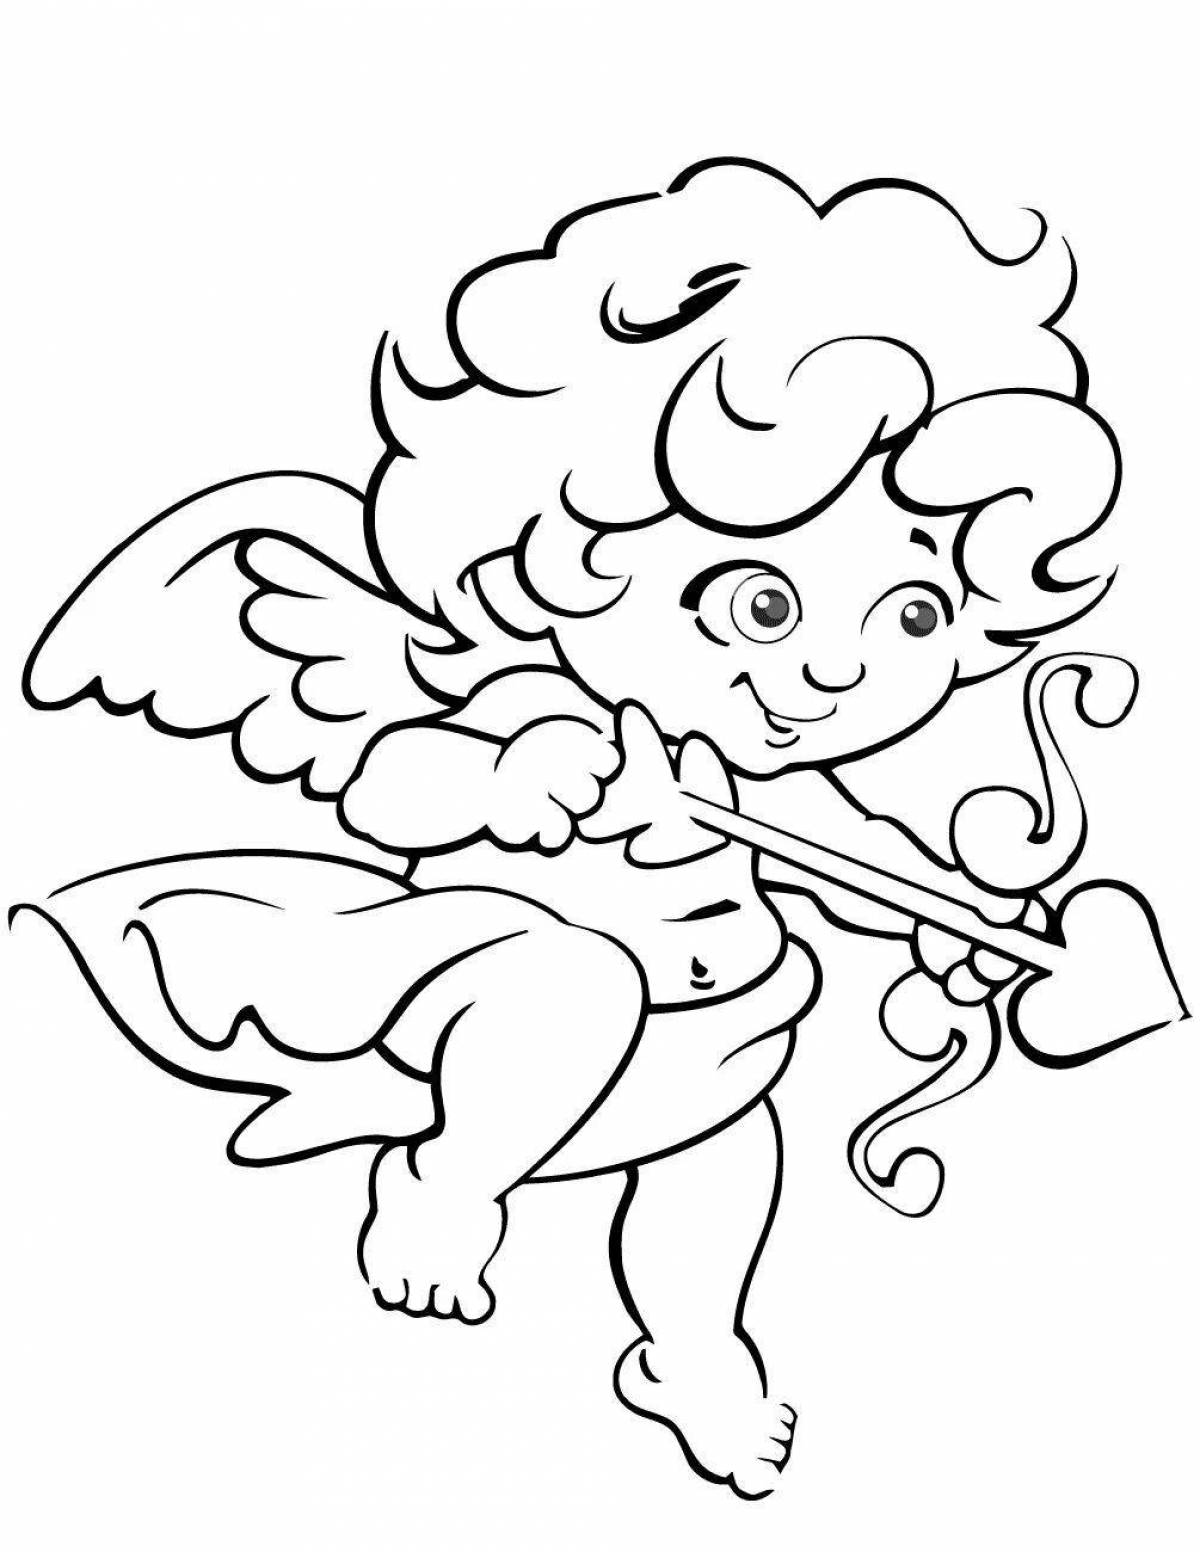 Coloring book glowing Cupid with a heart